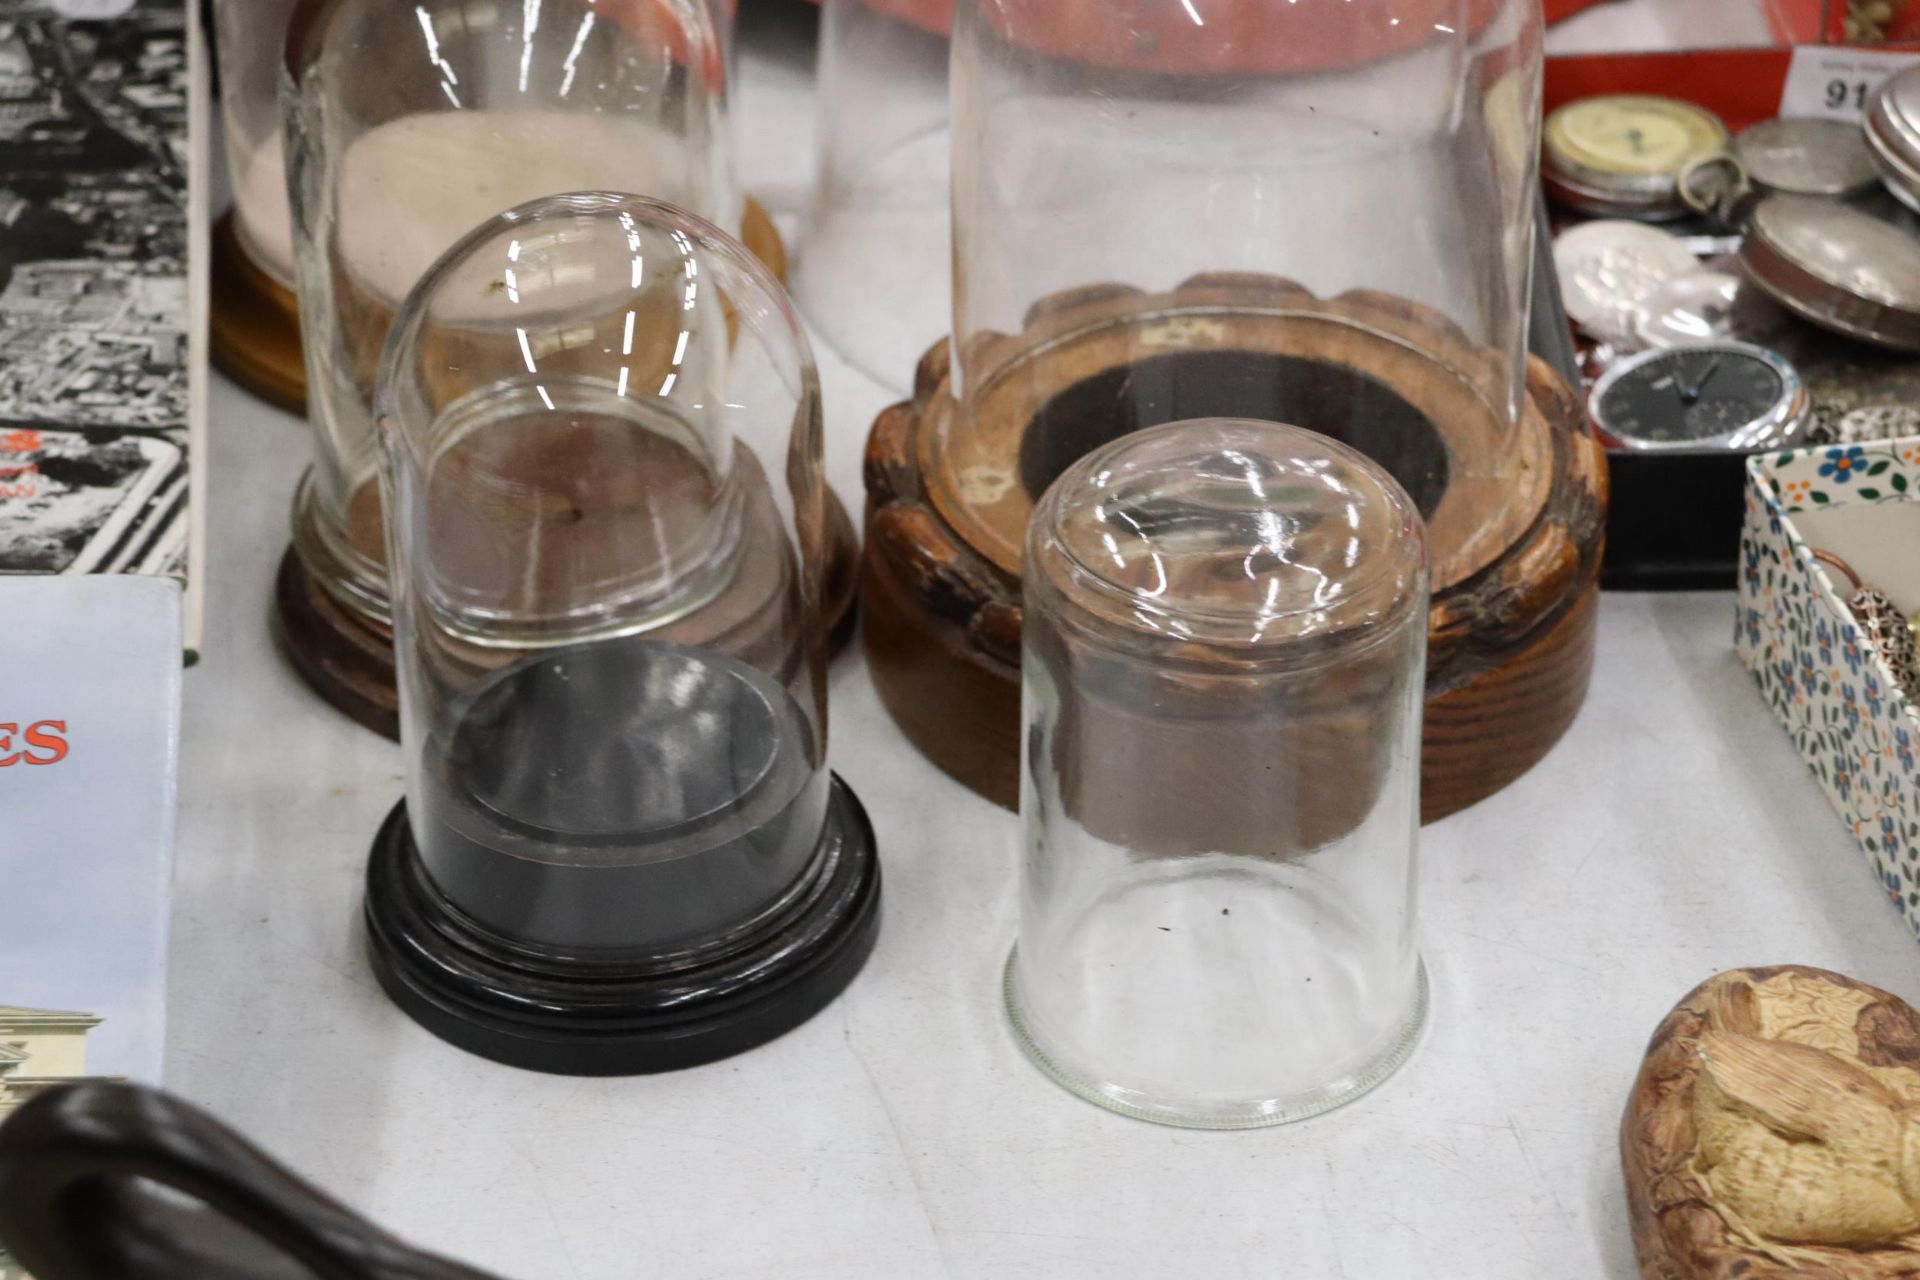 SIX DISPLAY DOMES AND FOUR BASES, FOUR GLASS AND TWO PLASTIC - Image 4 of 6